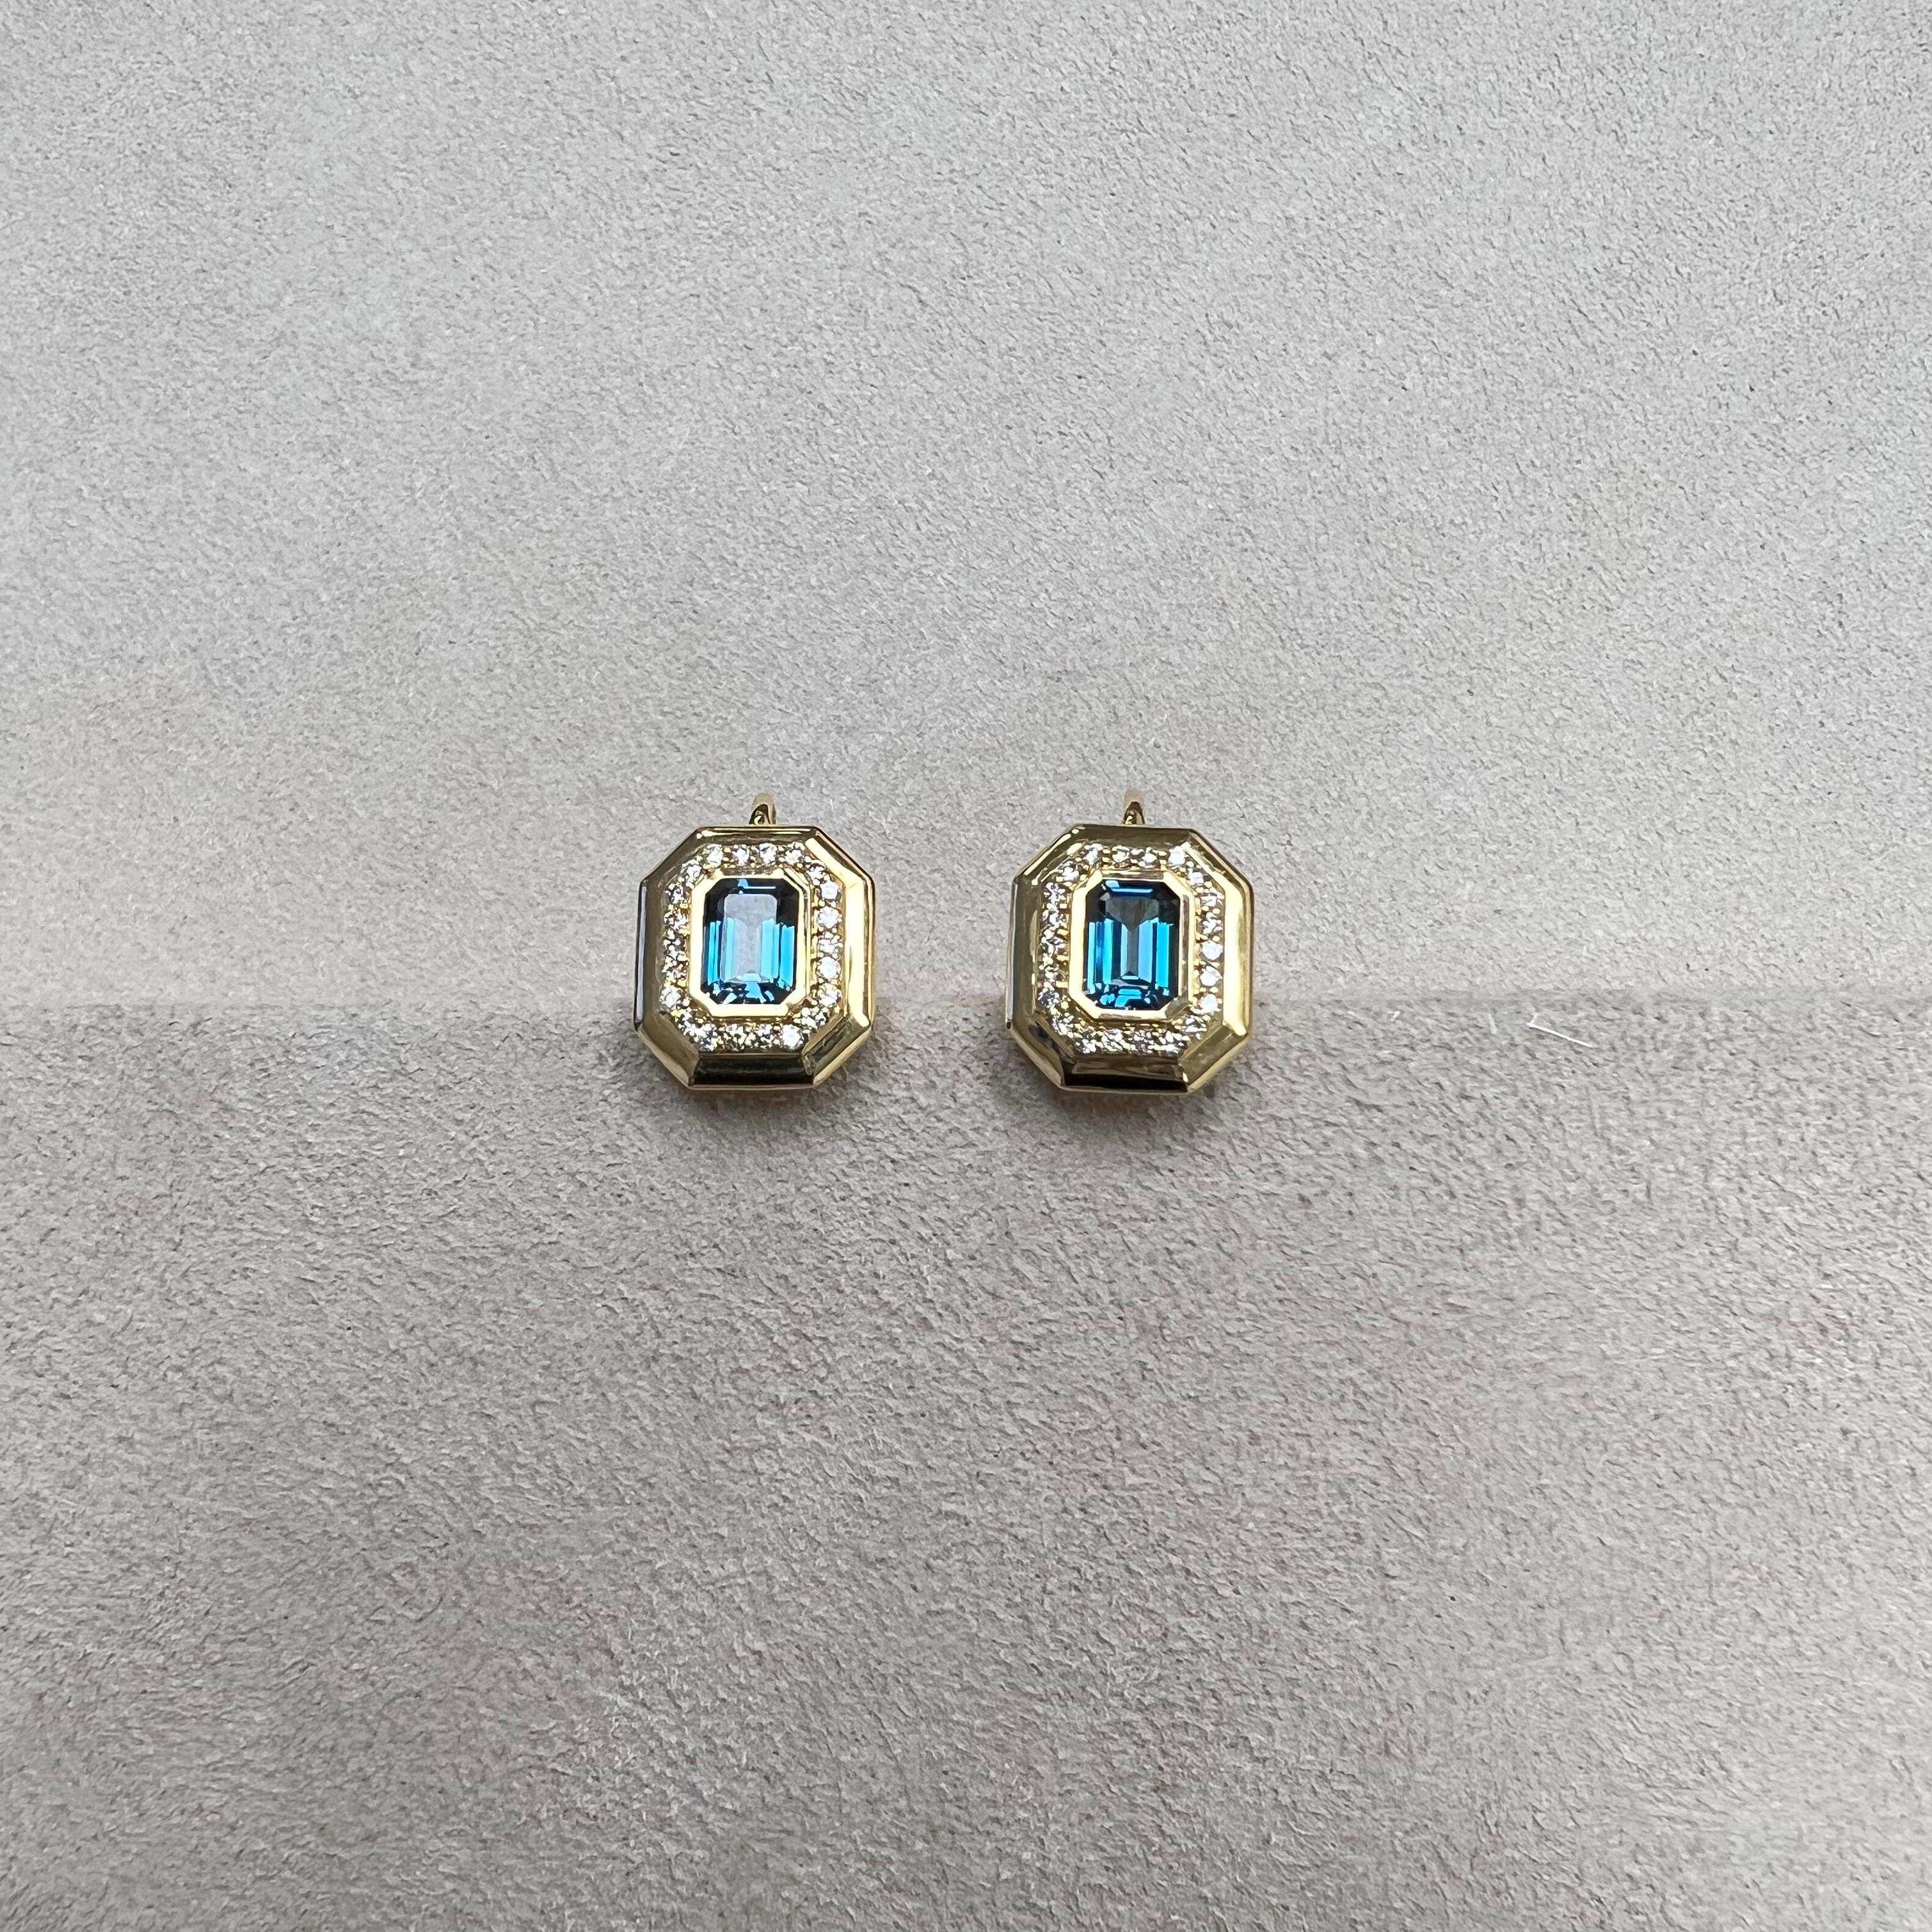 Created in 18 karat yellow gold
London blue topaz 2 carats approx.
Diamonds 0.45 carat approx.
French wire for pierced ears
Limited edition

Wrap yourself in a timeless symbol of power with the Chakra Long Necklace. Created from 18 karat yellow